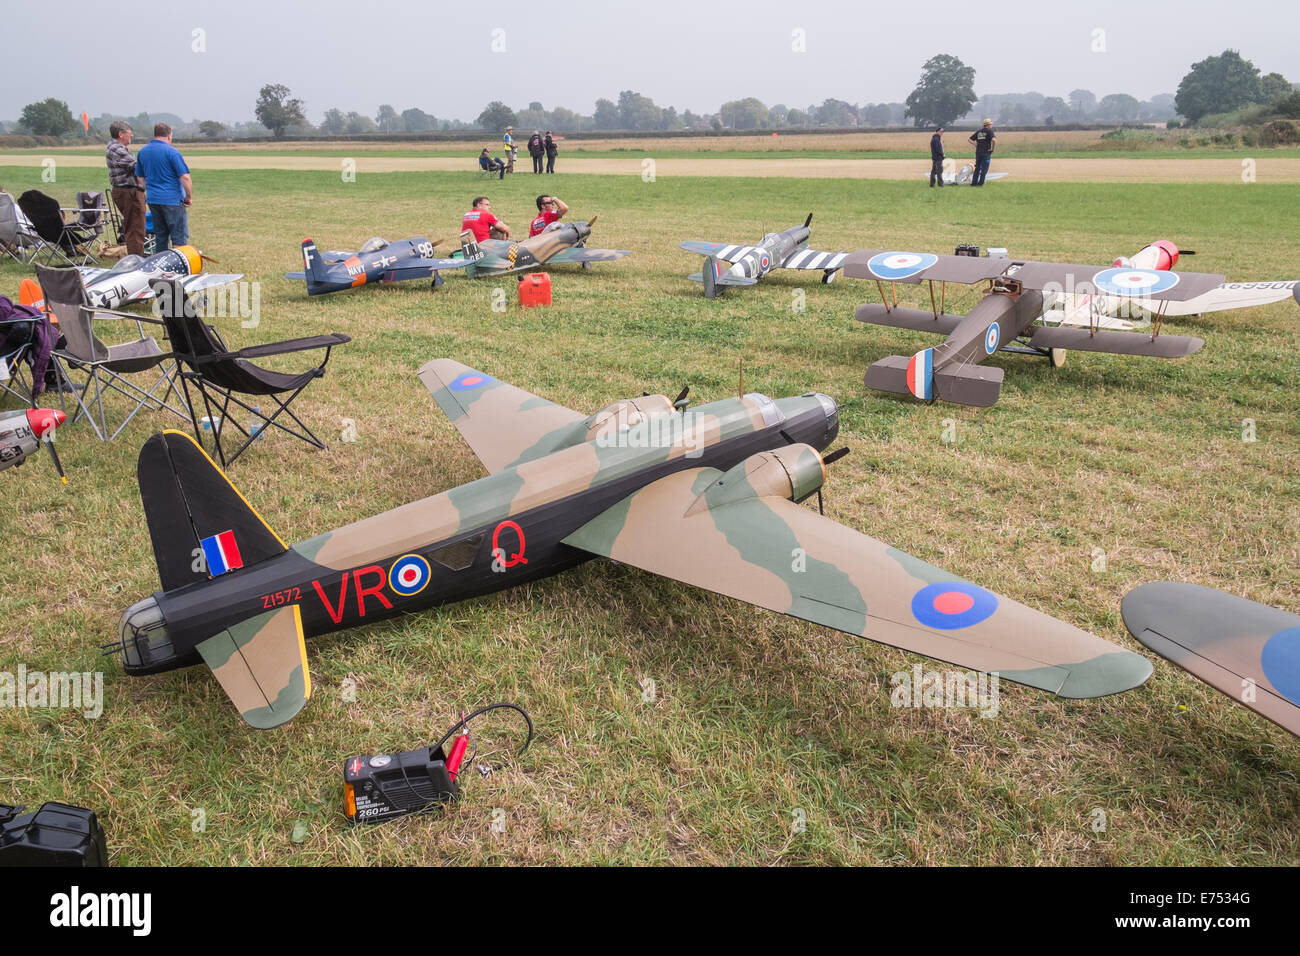 Remote controlled model plane enthusiasts at battle reenactment event, Leicestershire, England Stock Photo